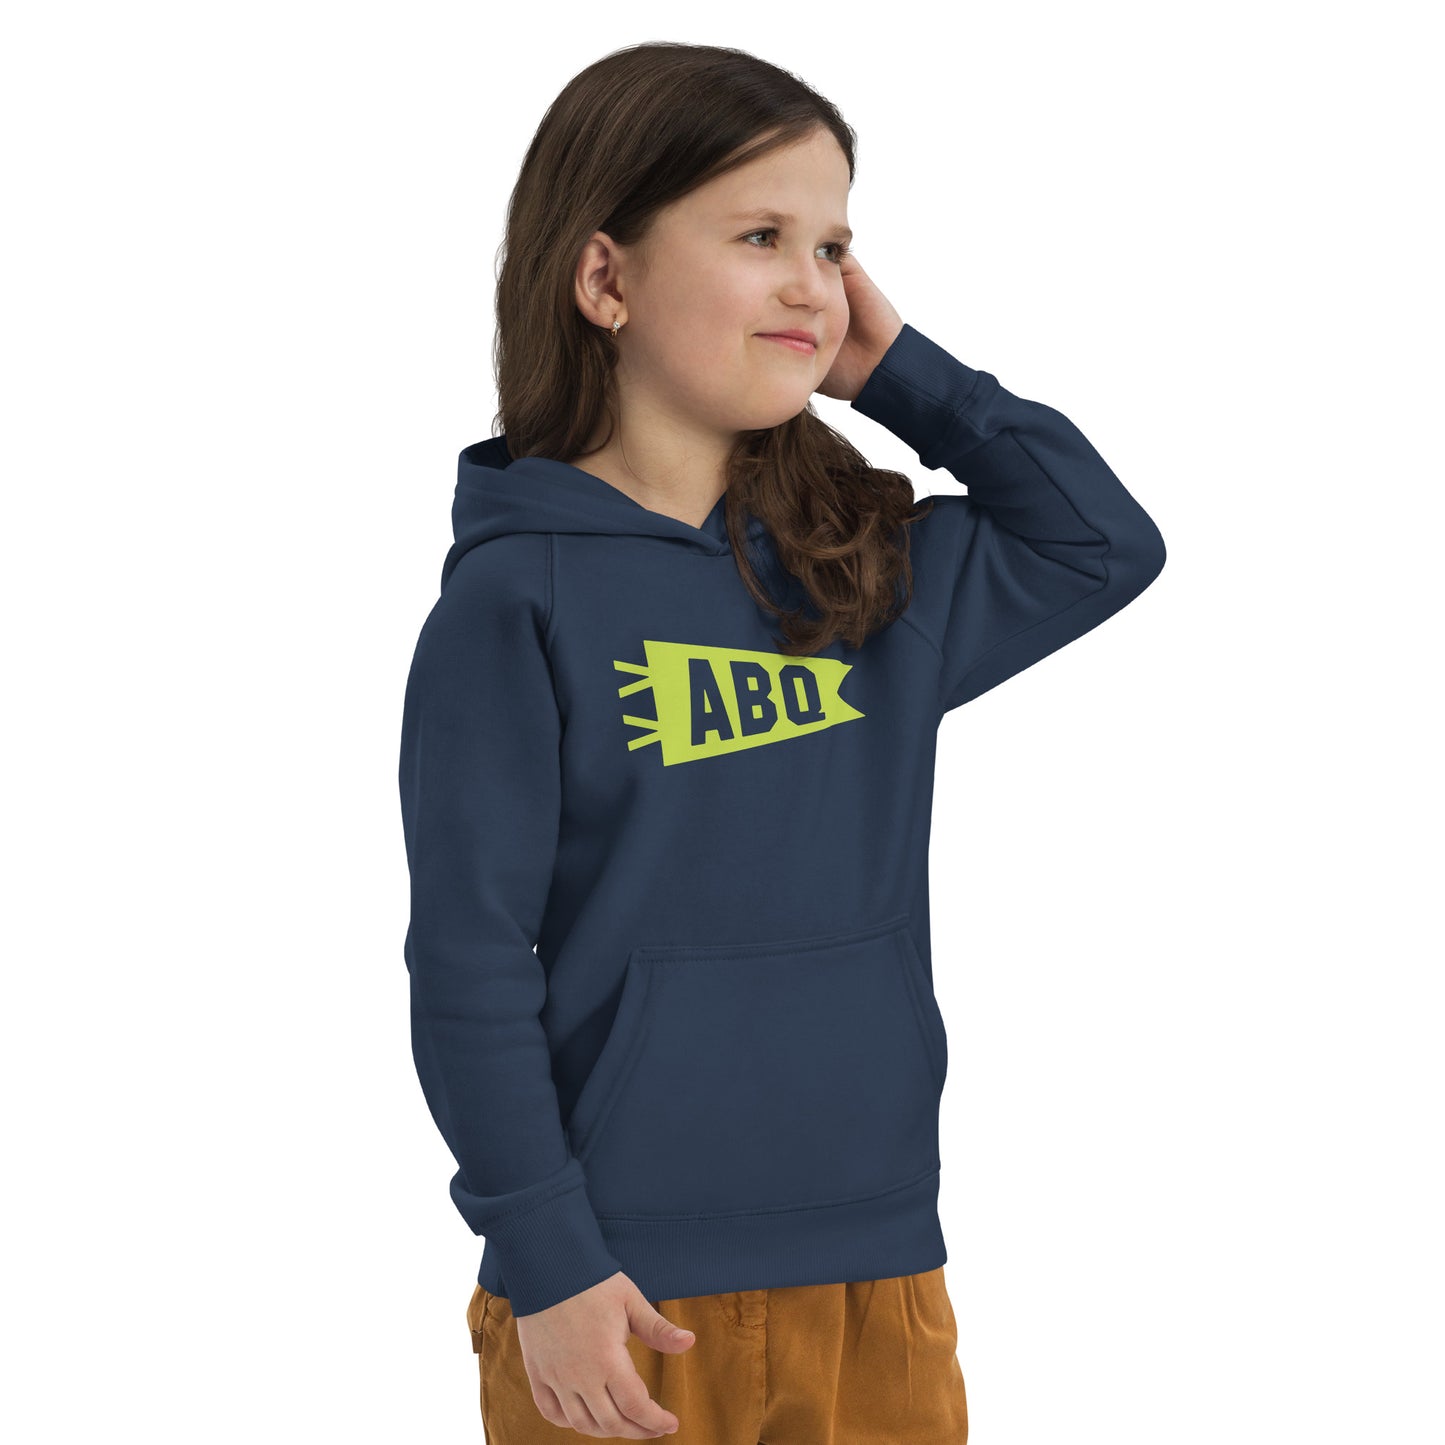 Kid's Sustainable Hoodie - Green Graphic • ABQ Albuquerque • YHM Designs - Image 06